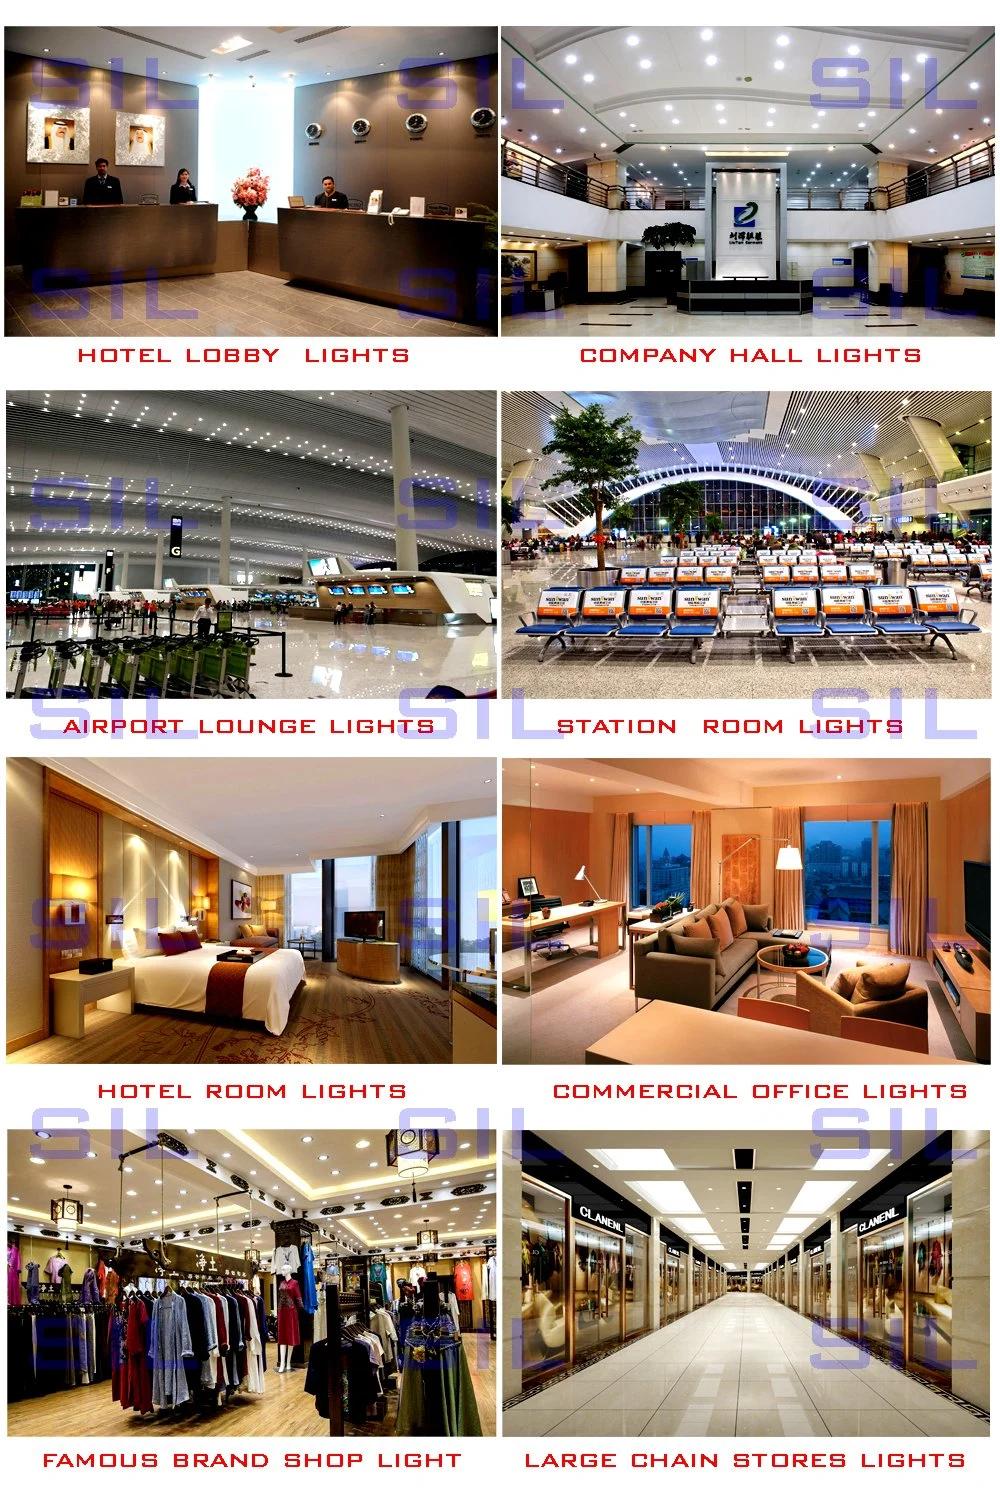 High Display Refers to High Quality 6 " 12W 15W Ceiling Lamp Down Light